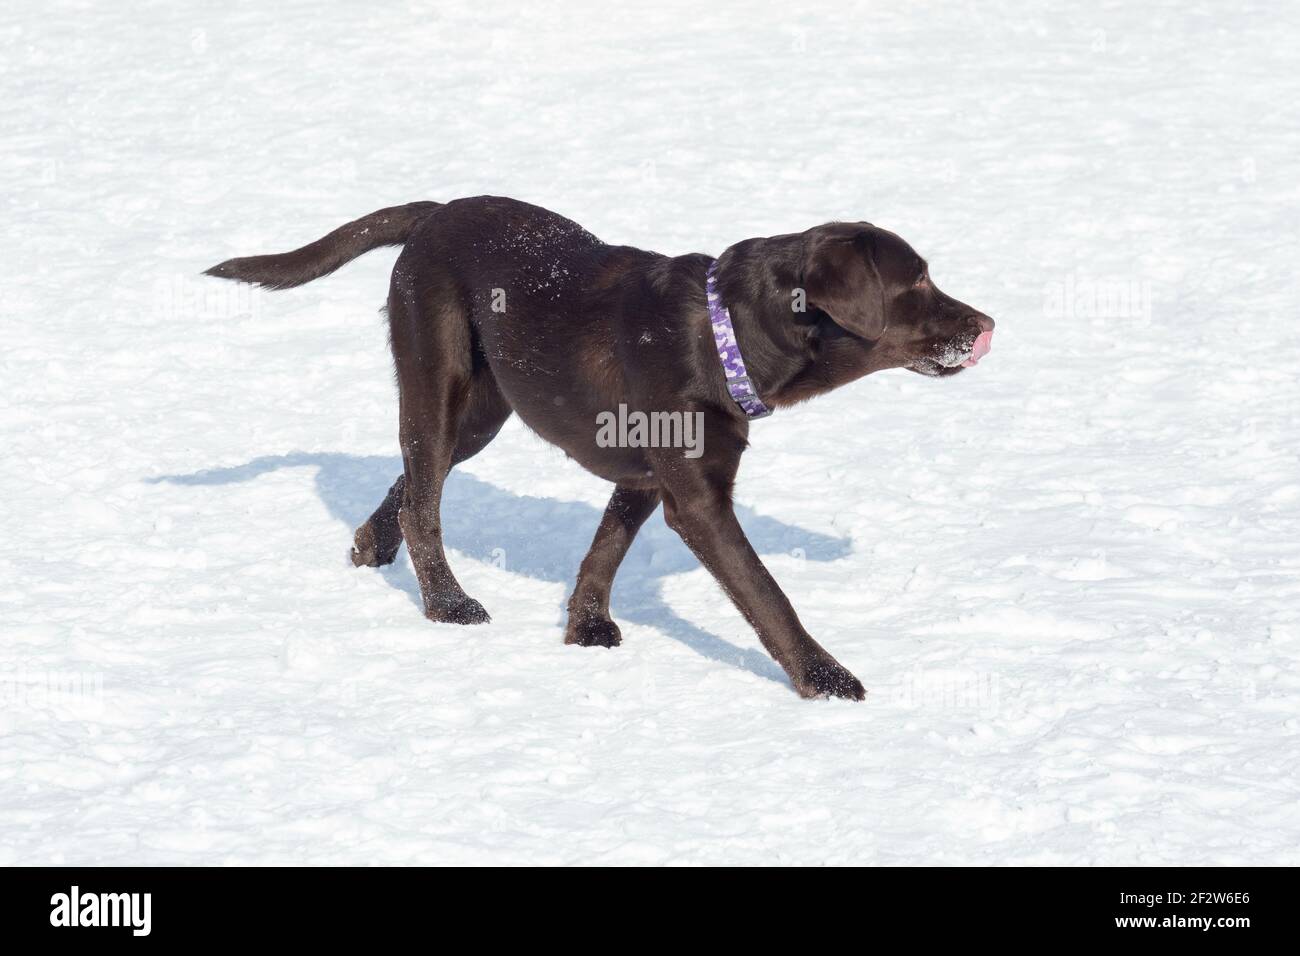 Chocolate labrador retriever is walking on white snow in the winter park. Pet animals. Purebred dog. Stock Photo